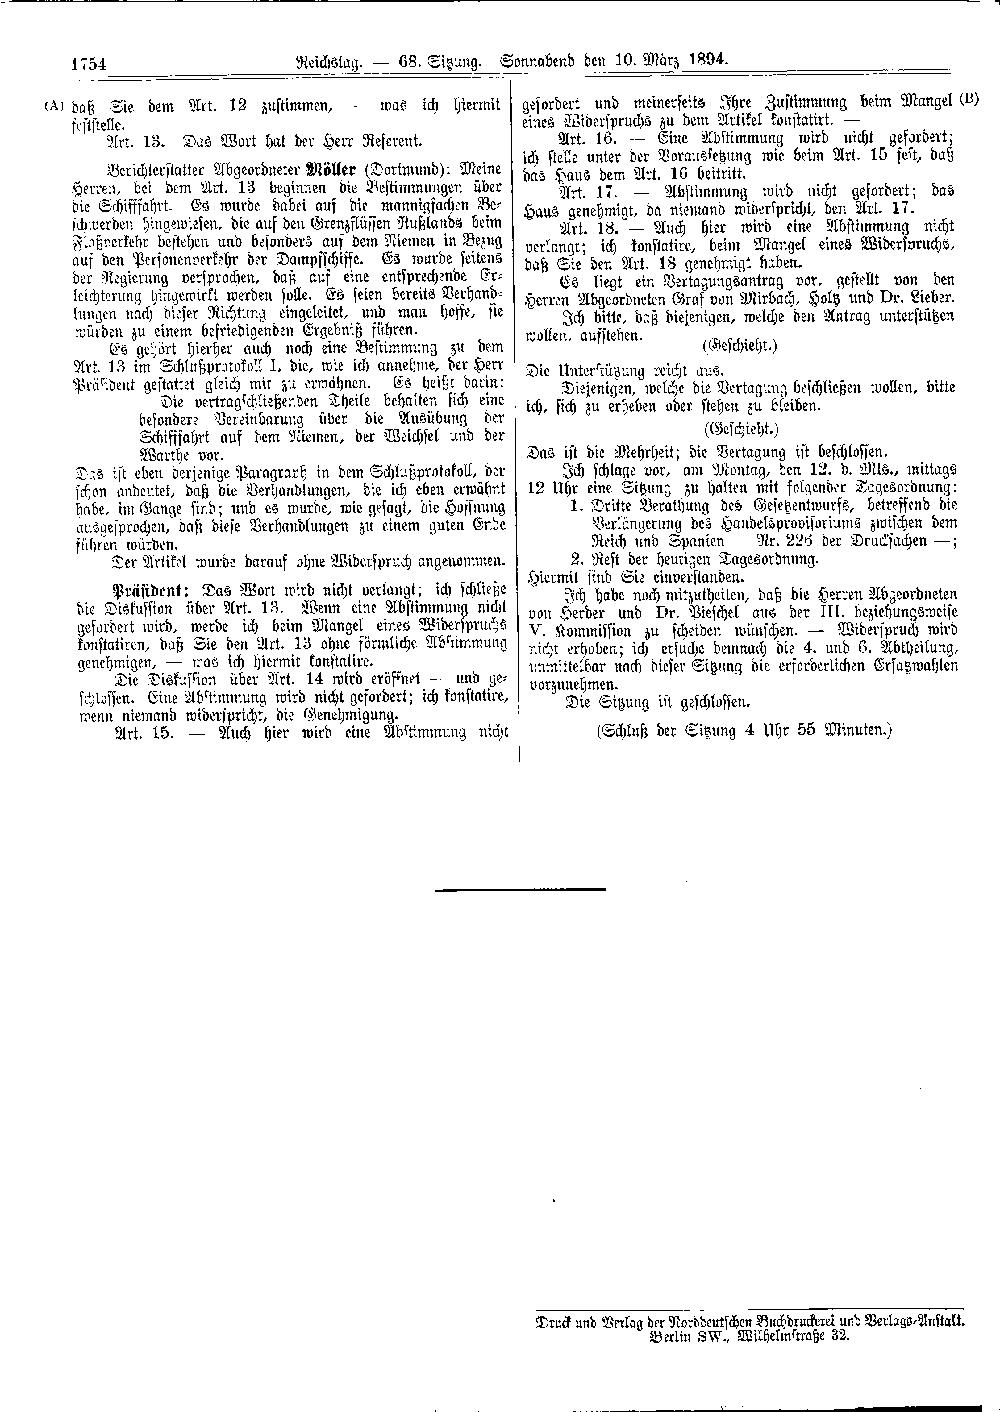 Scan of page 1754